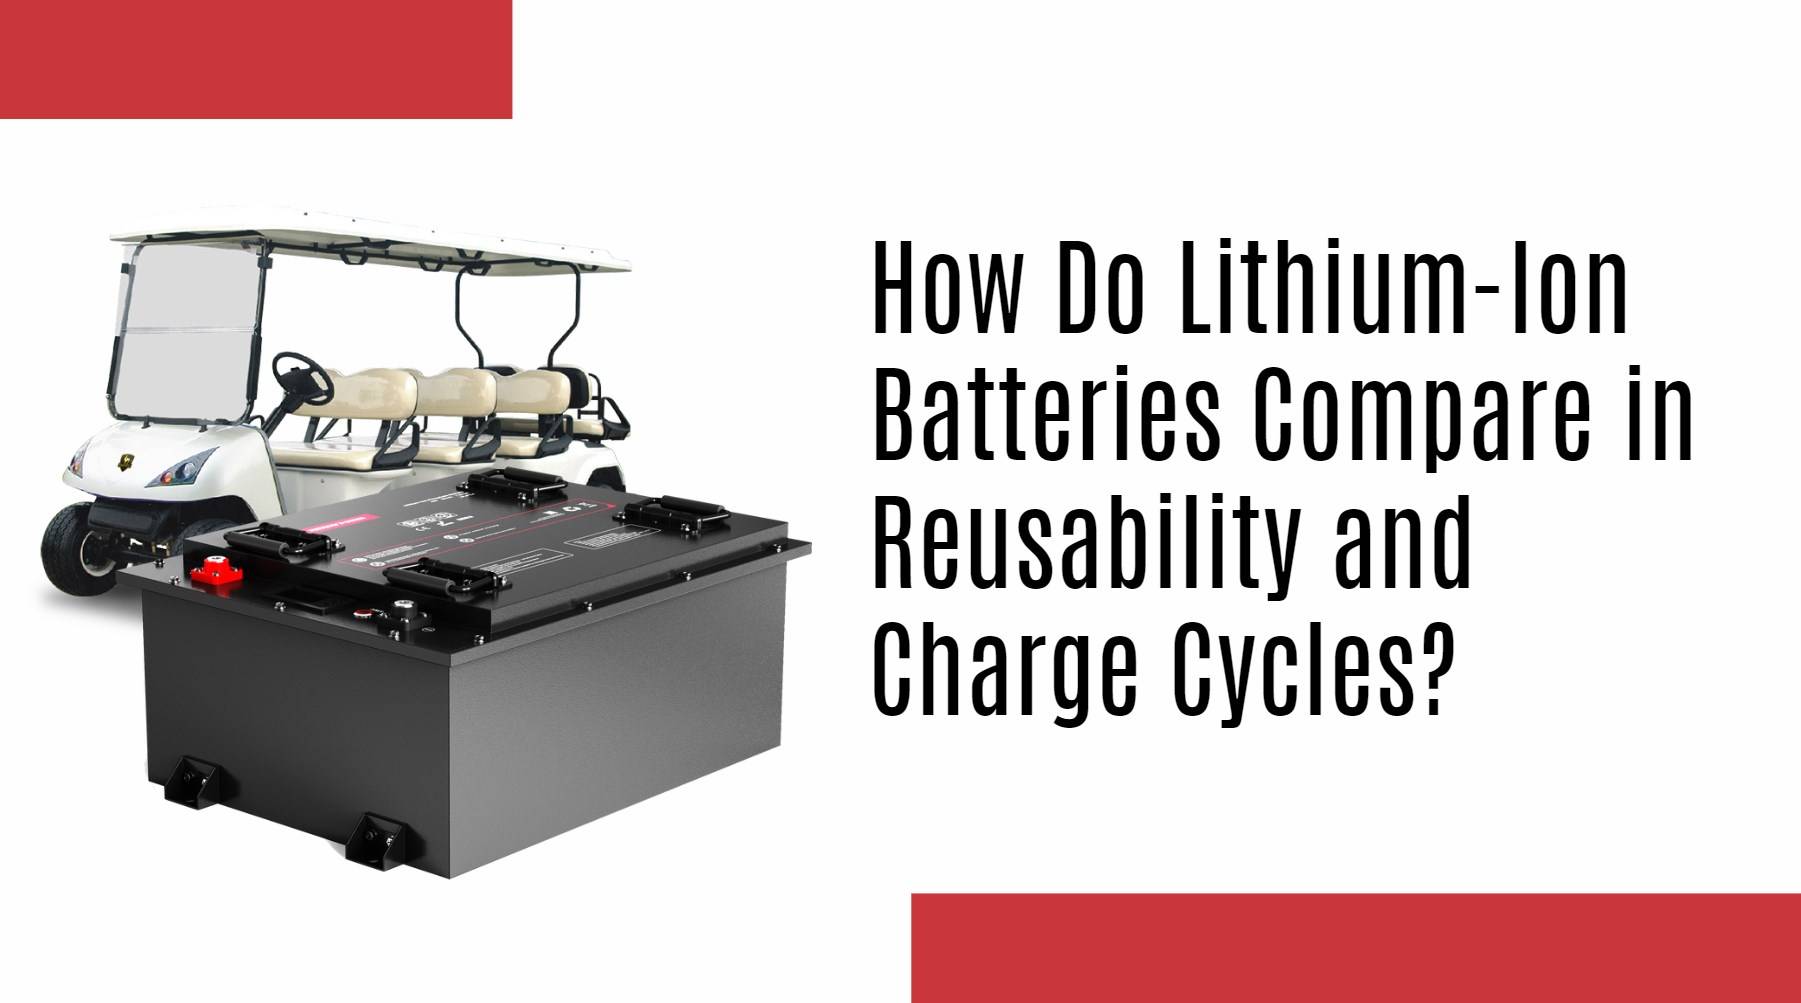 How Do Lithium-Ion Batteries Compare in Reusability and Charge Cycles?